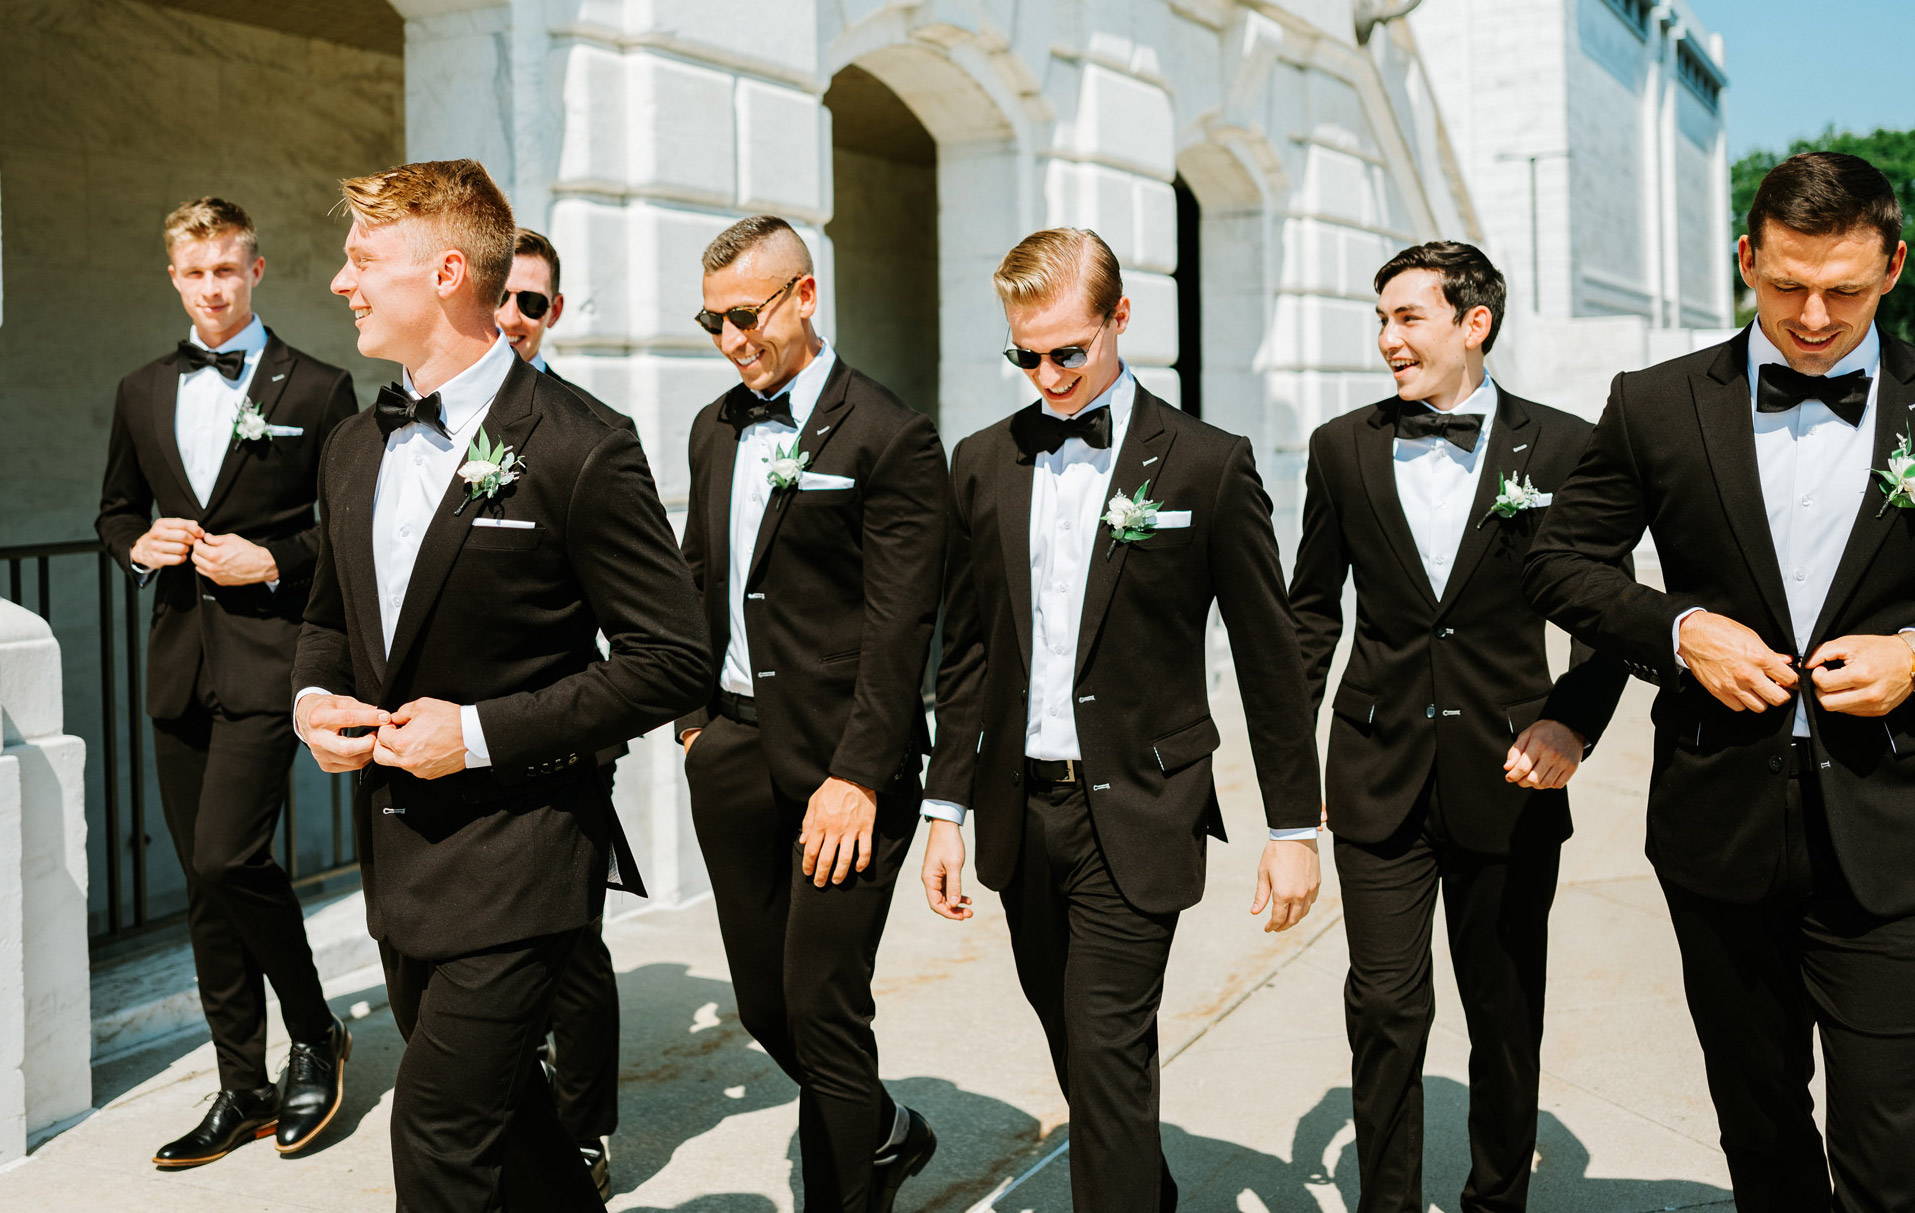 The Best Stretch Wedding Suits and Tuxedos for Men